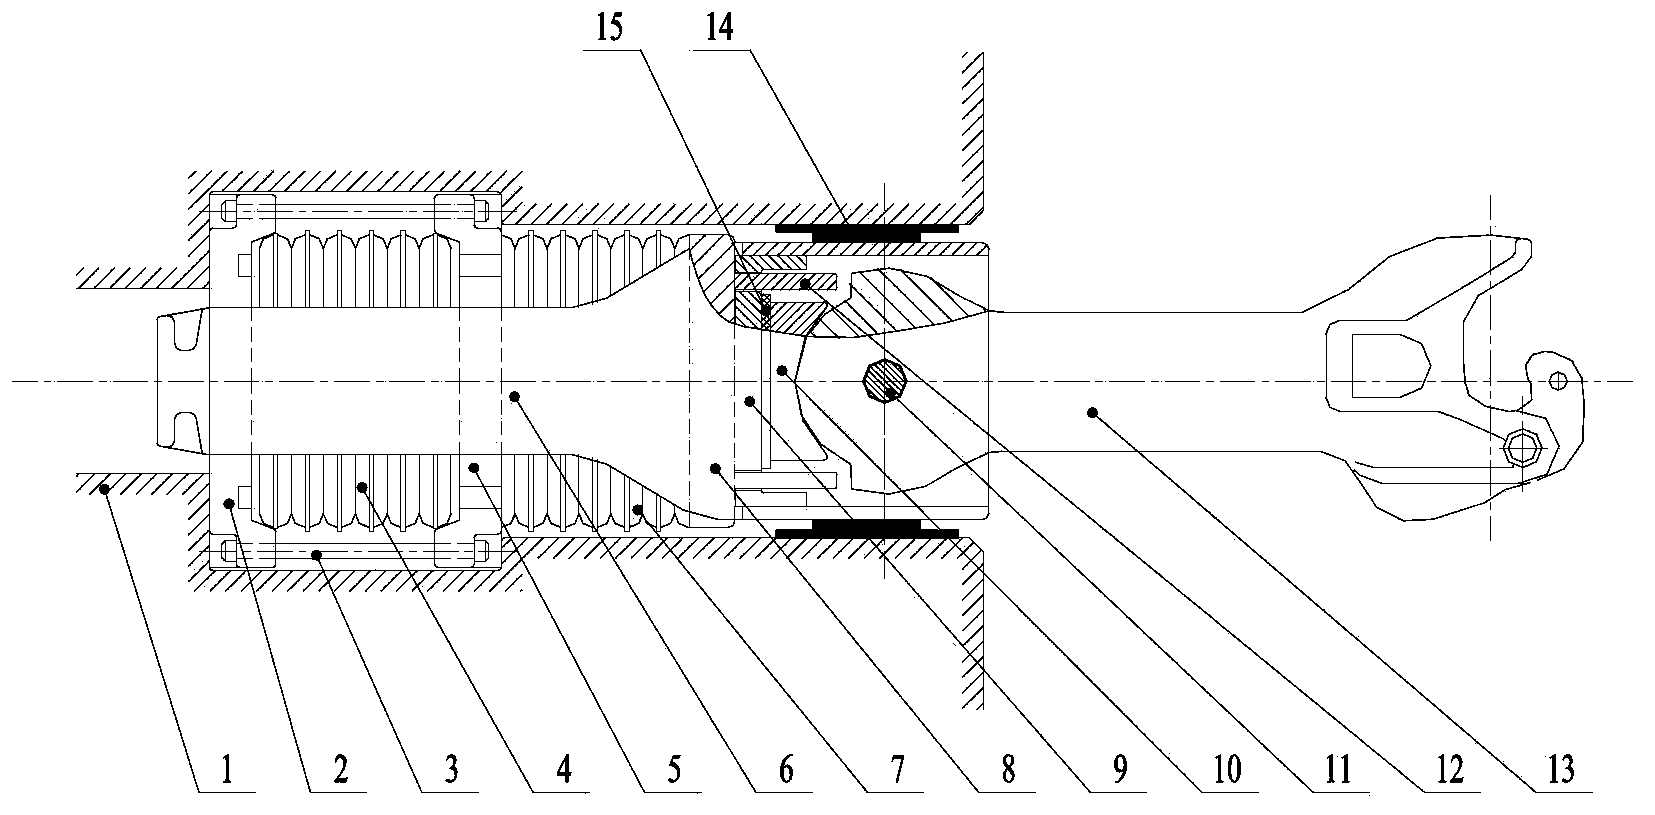 Heavy-load coupler with safety stop and low transverse force properties